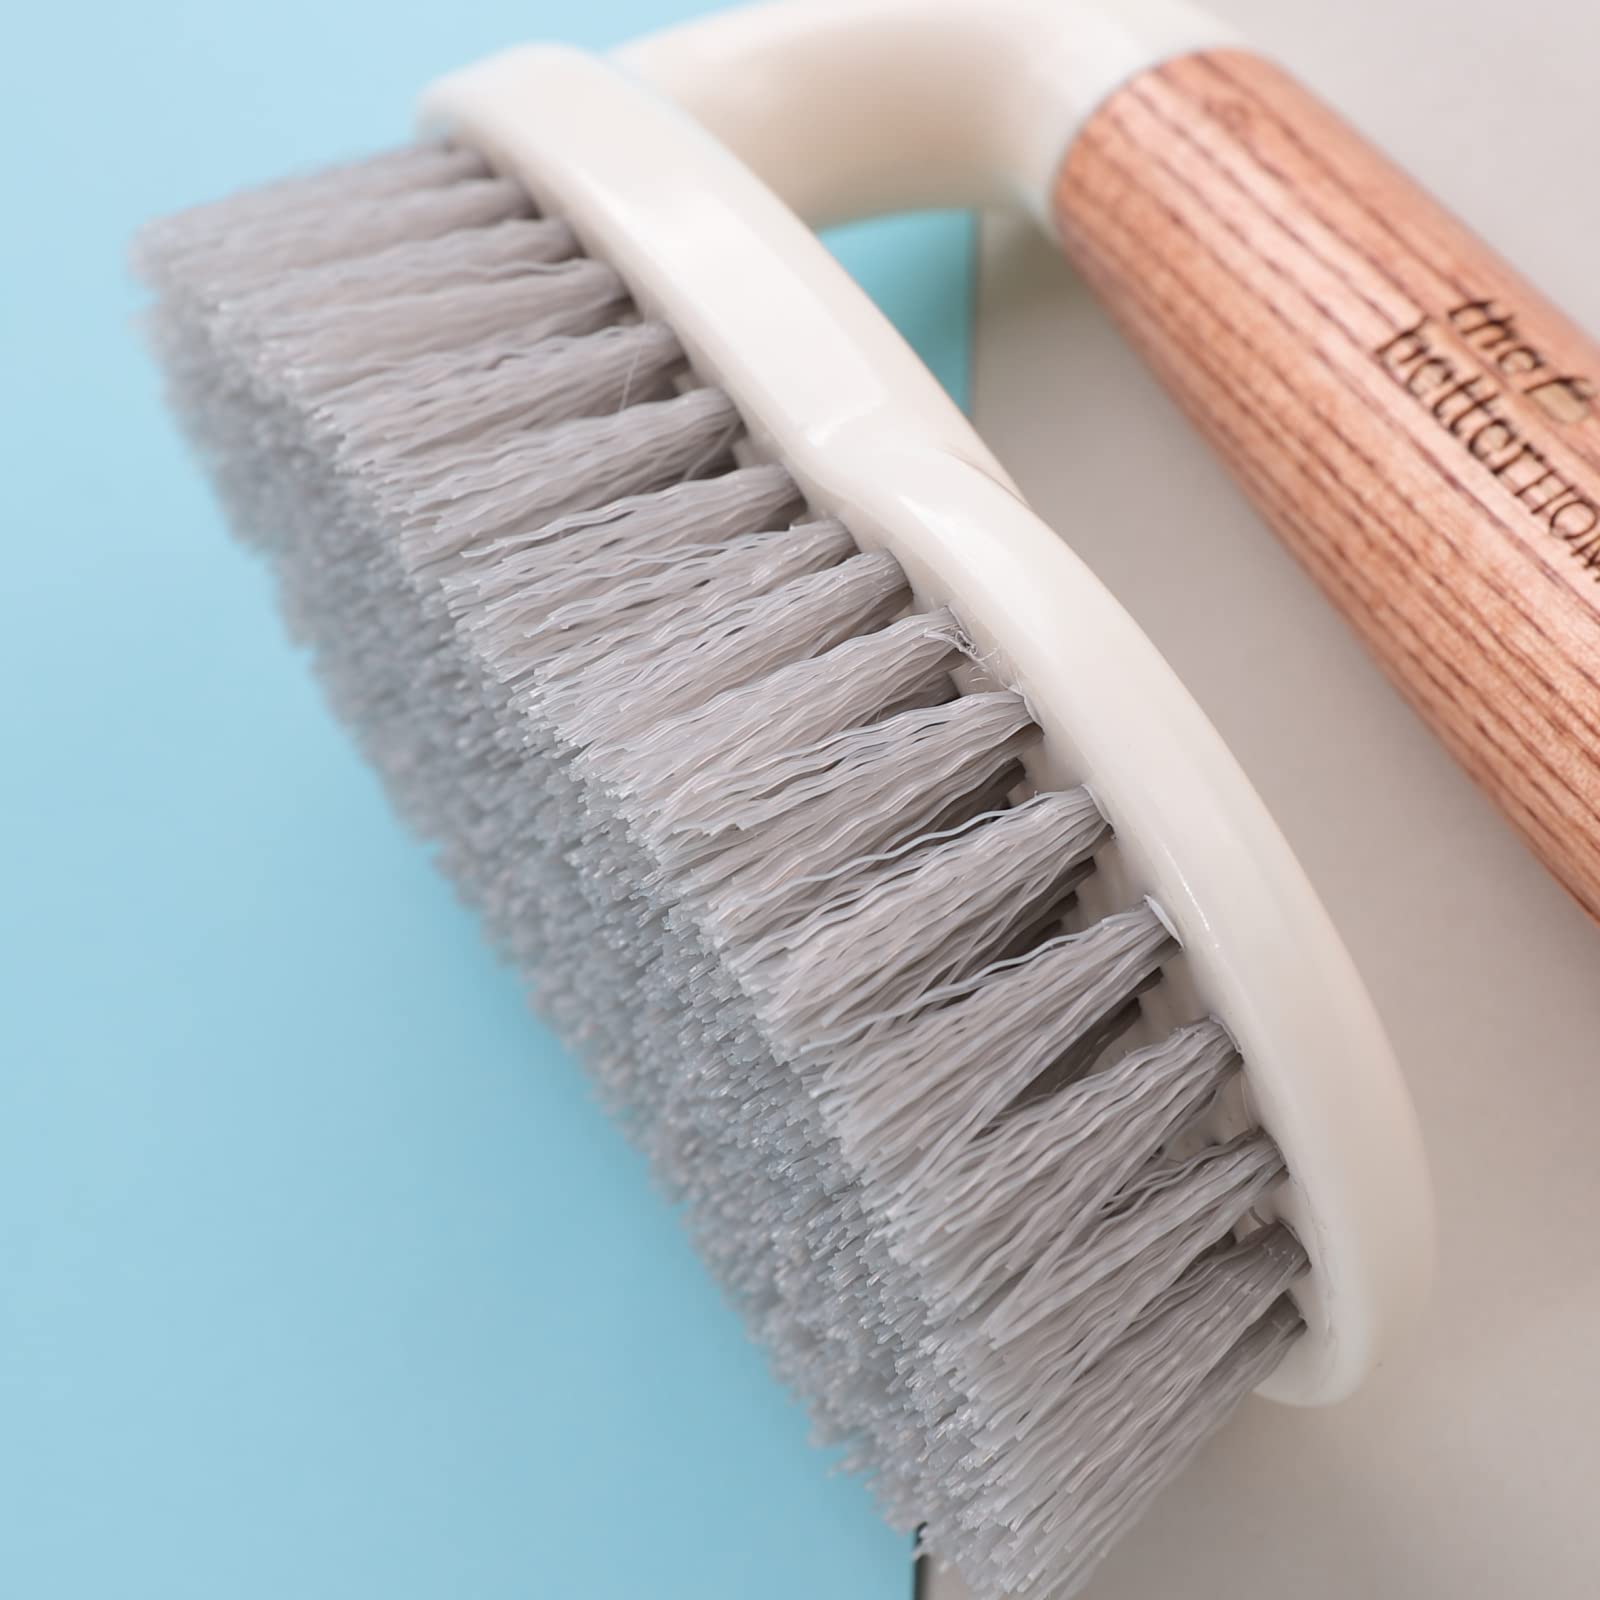 Wooden Multi-Purpose Cleaning Brush | Scrubber for Kitchen | Cleaning Brush for Bathroom & All Surfaces | Wet and Dry Tile Cleaner Brush (Scrubber)